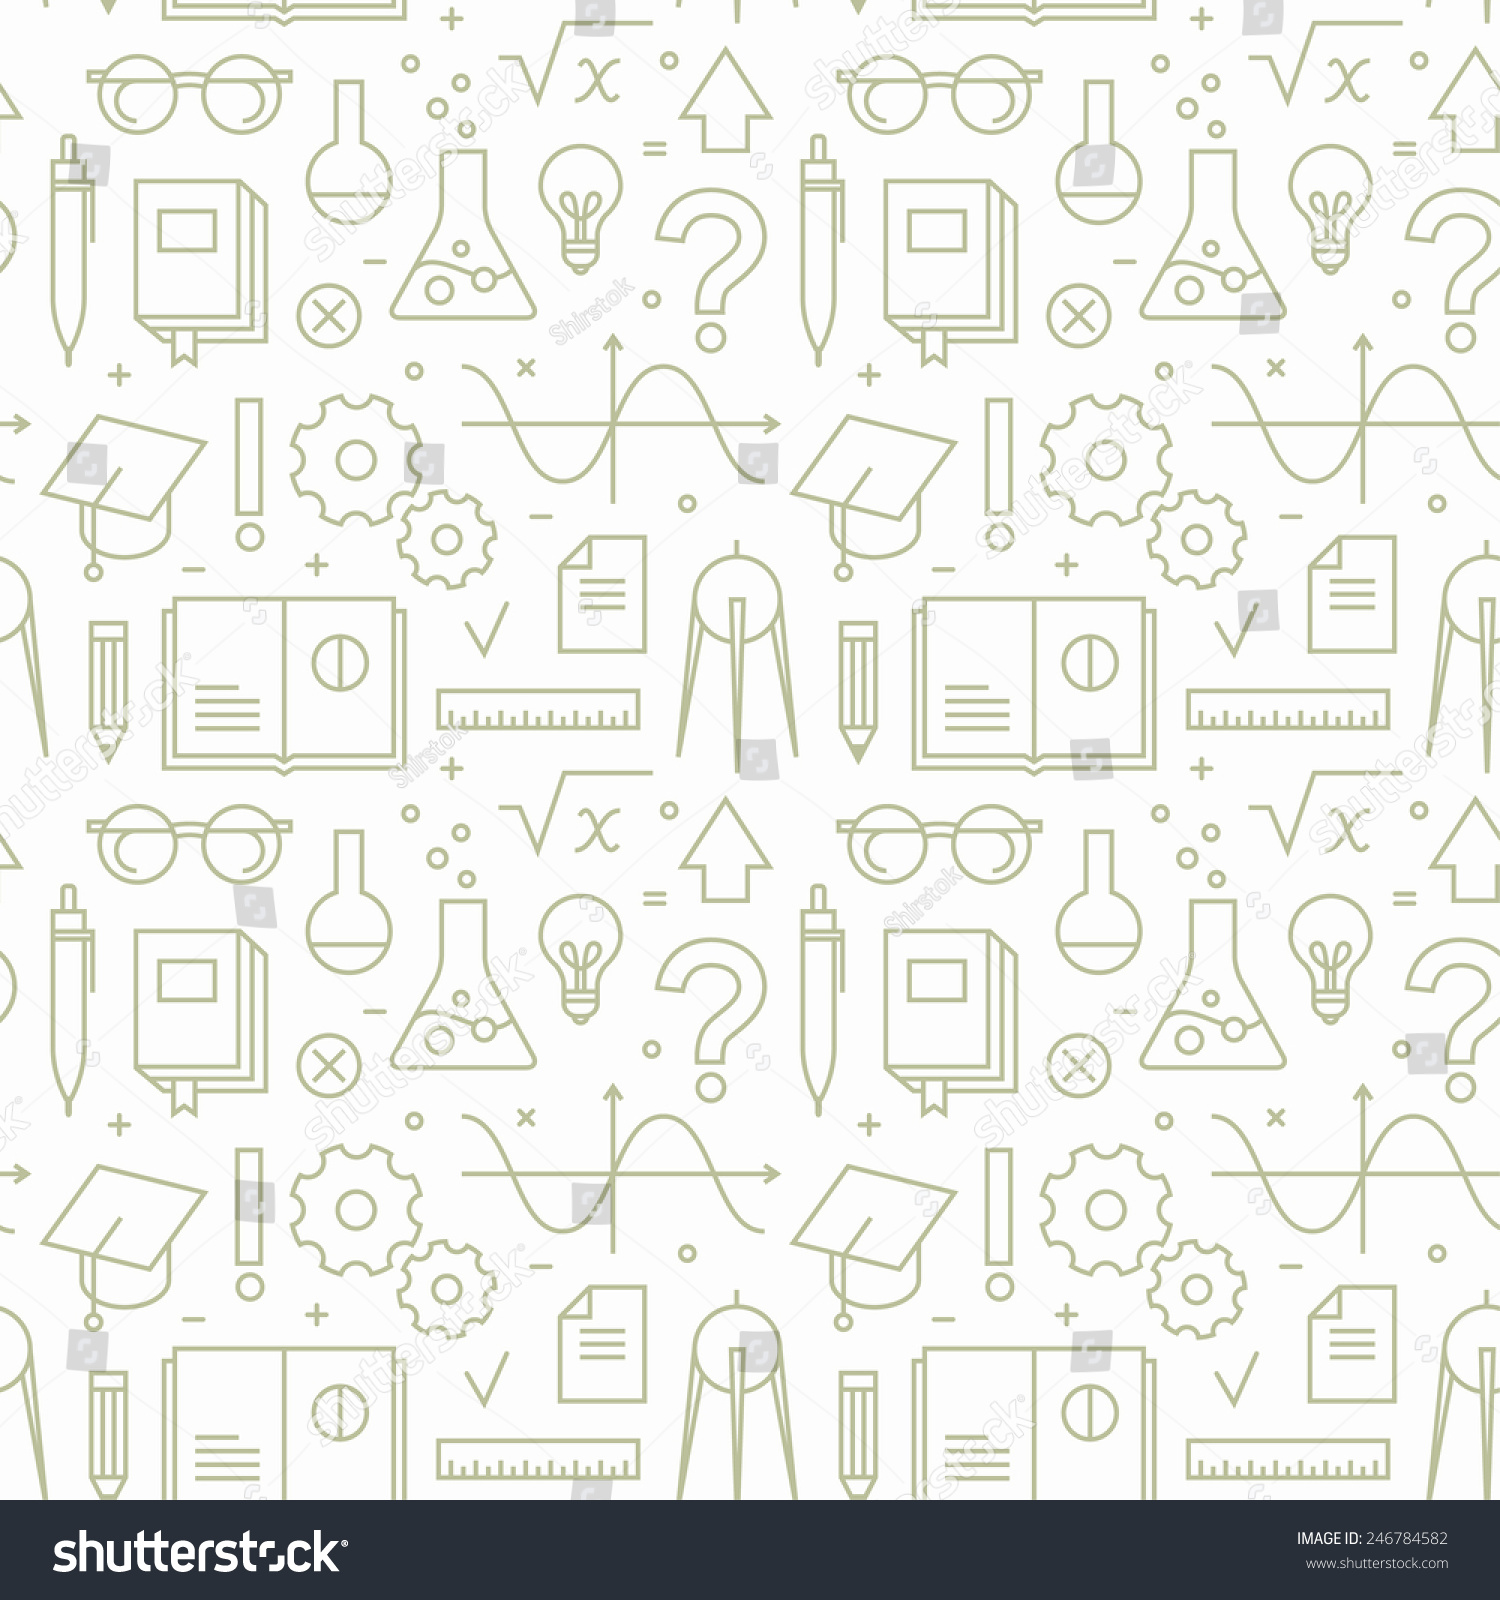 SVG of Seamless pattern with school icons. svg